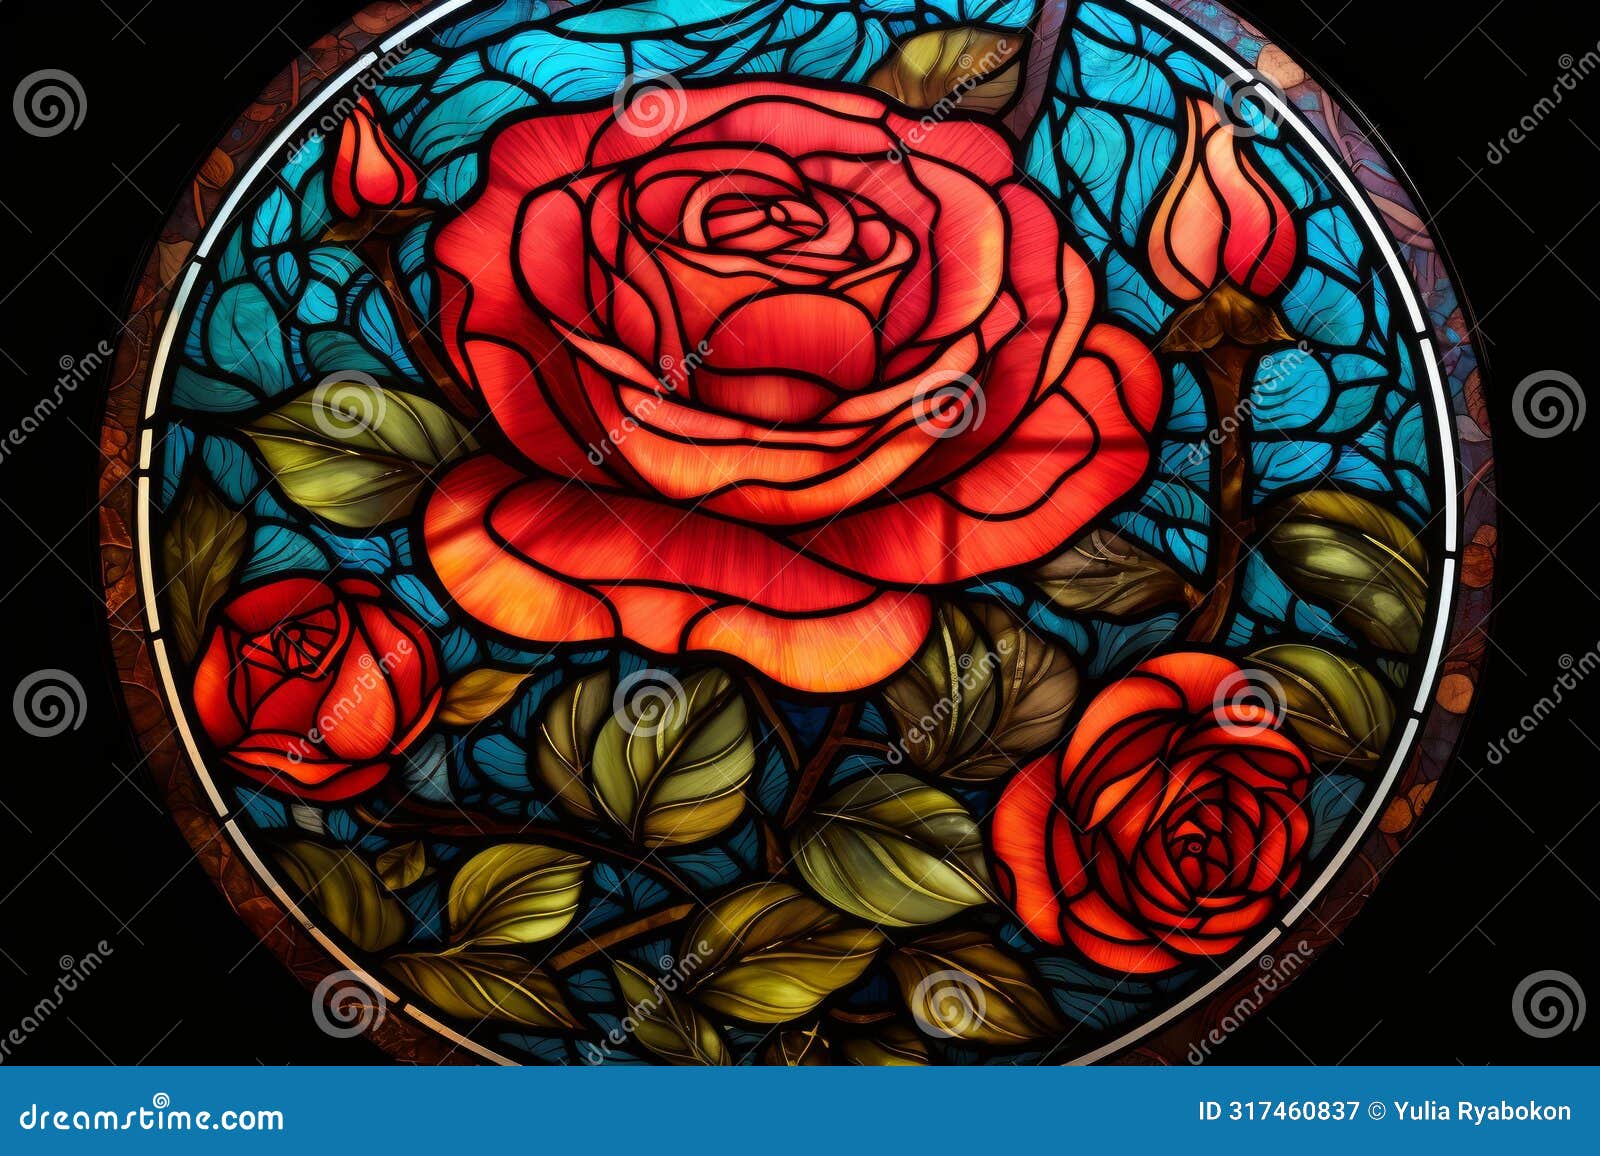 captivating red rose glass. generate ai